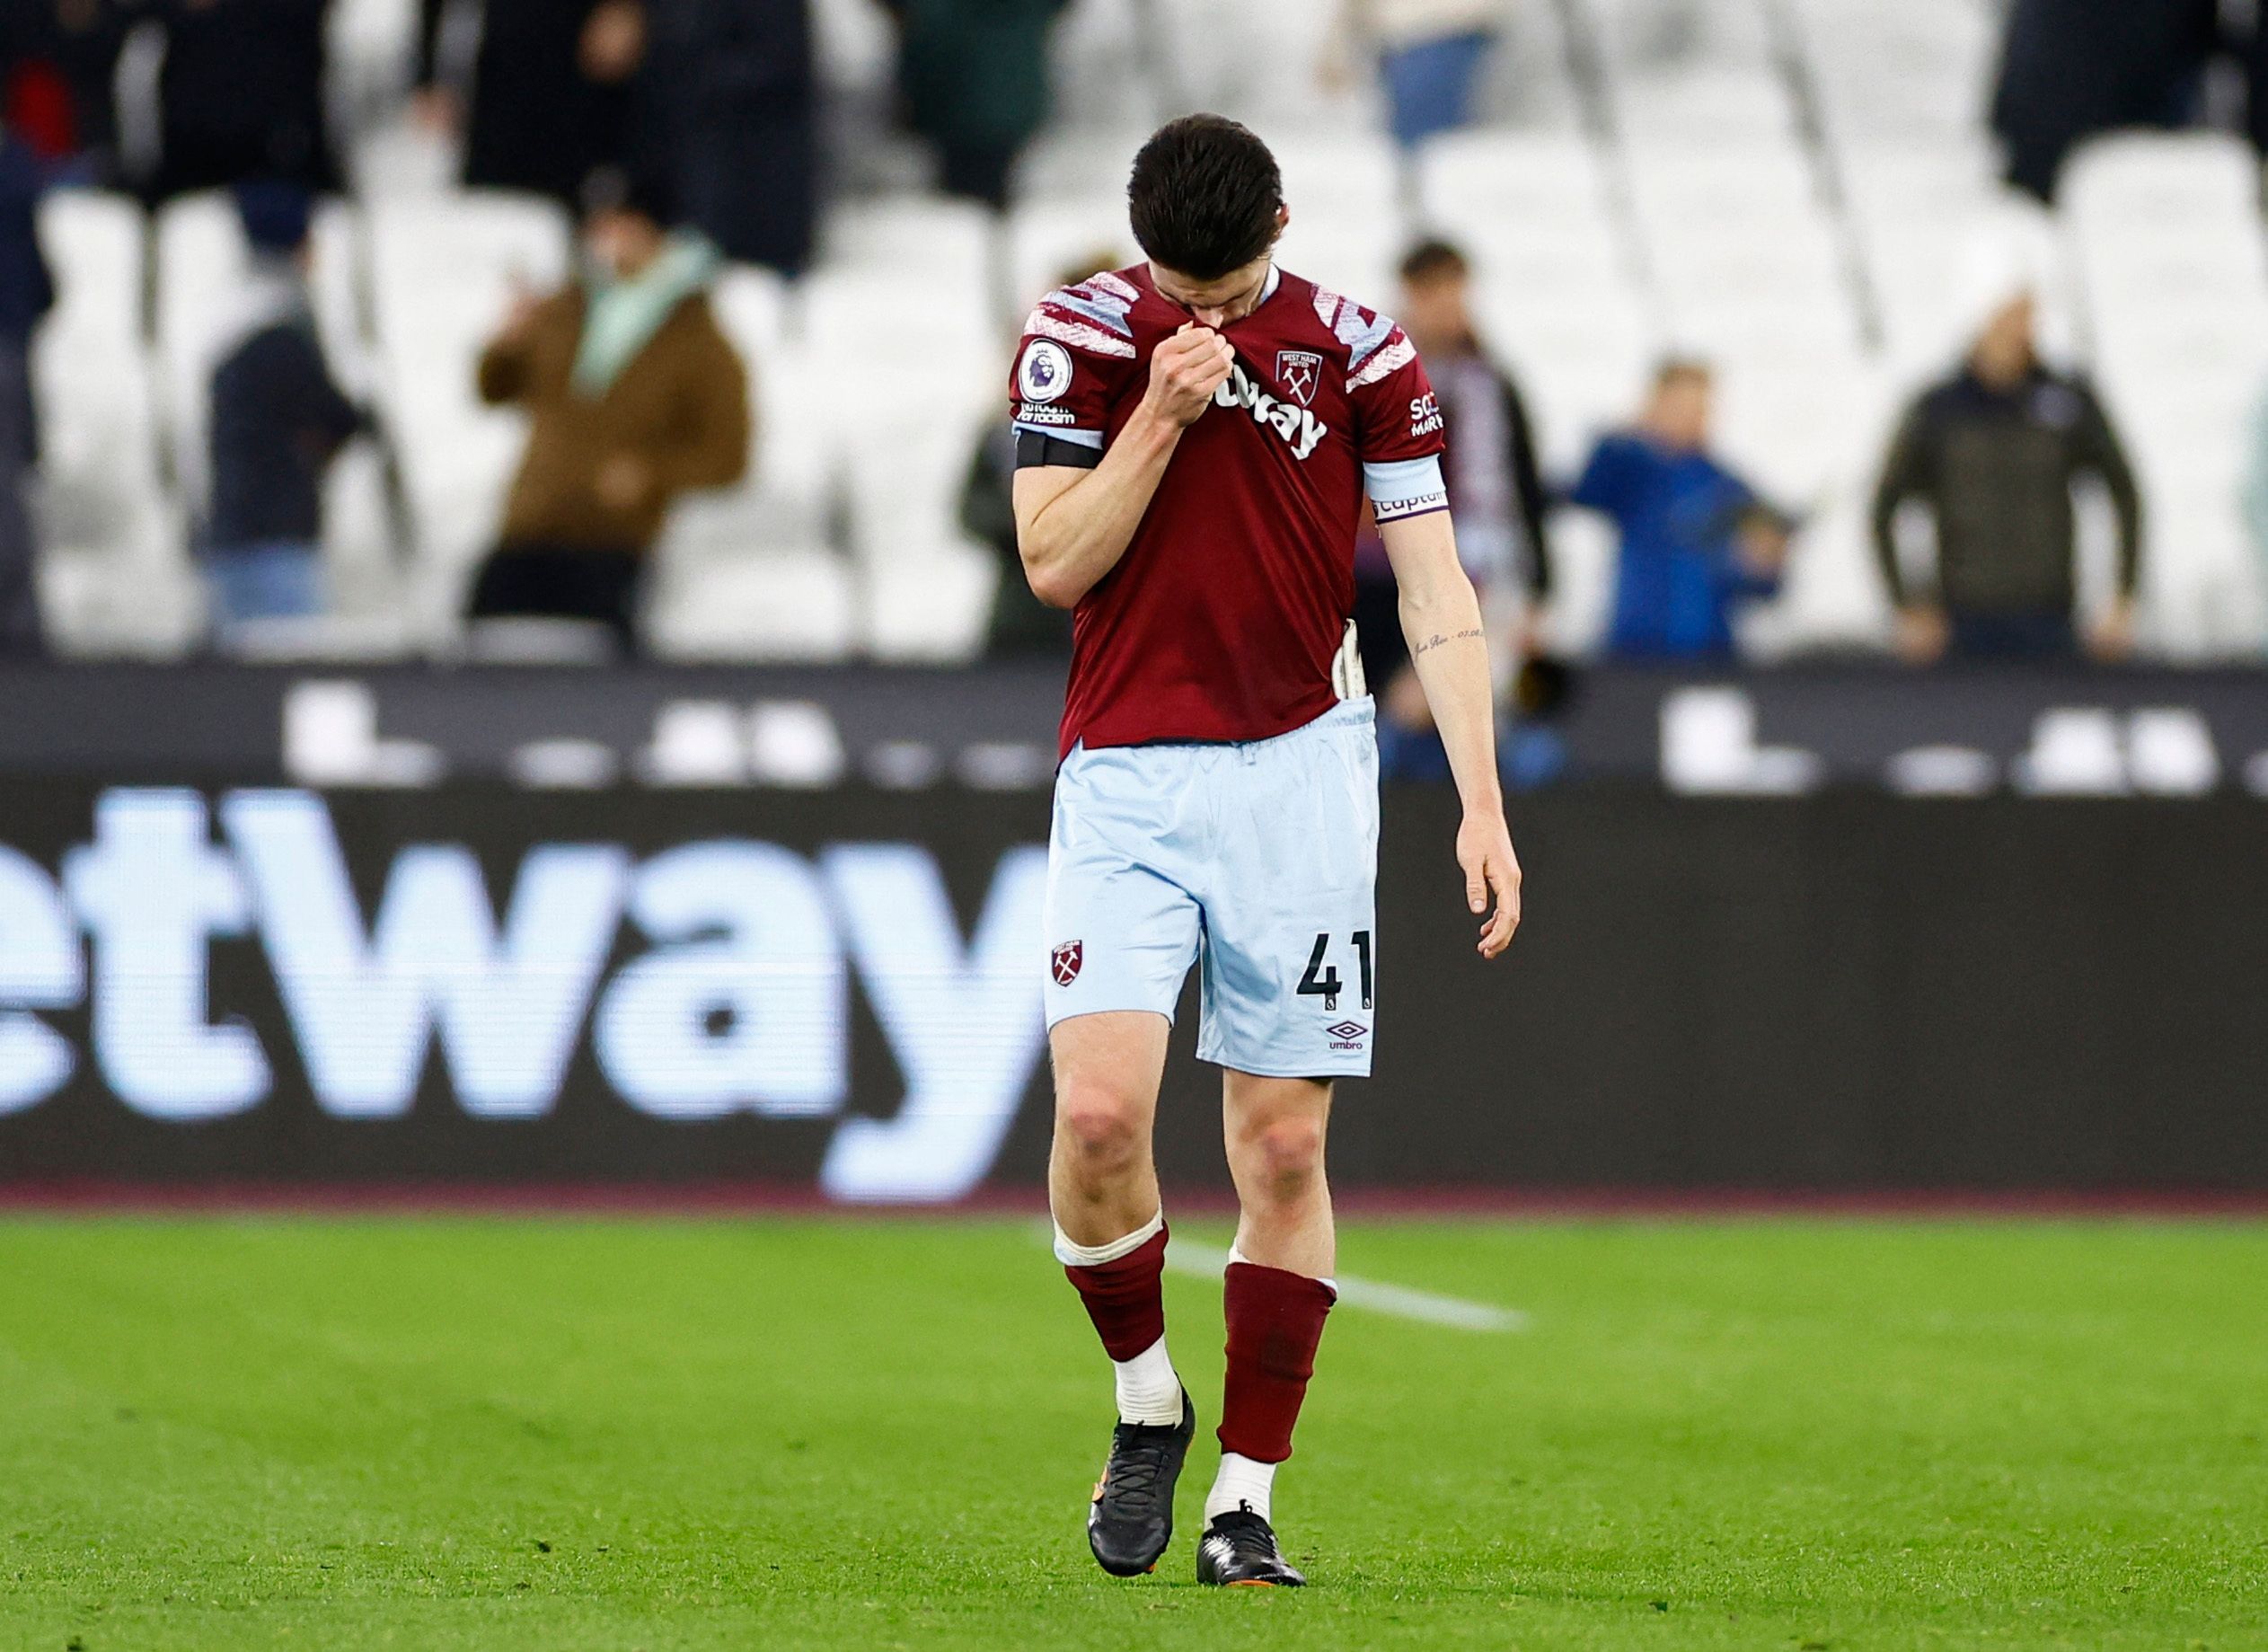 Soccer Football - Premier League - West Ham United v Brentford - London Stadium, London, Britain - December 30, 2022 West Ham United's Declan Rice looks dejected after the match Action Images via Reuters/Andrew Boyers EDITORIAL USE ONLY. No use with unauthorized audio, video, data, fixture lists, club/league logos or 'live' services. Online in-match use limited to 75 images, no video emulation. No use in betting, games or single club /league/player publications.  Please contact your account repr